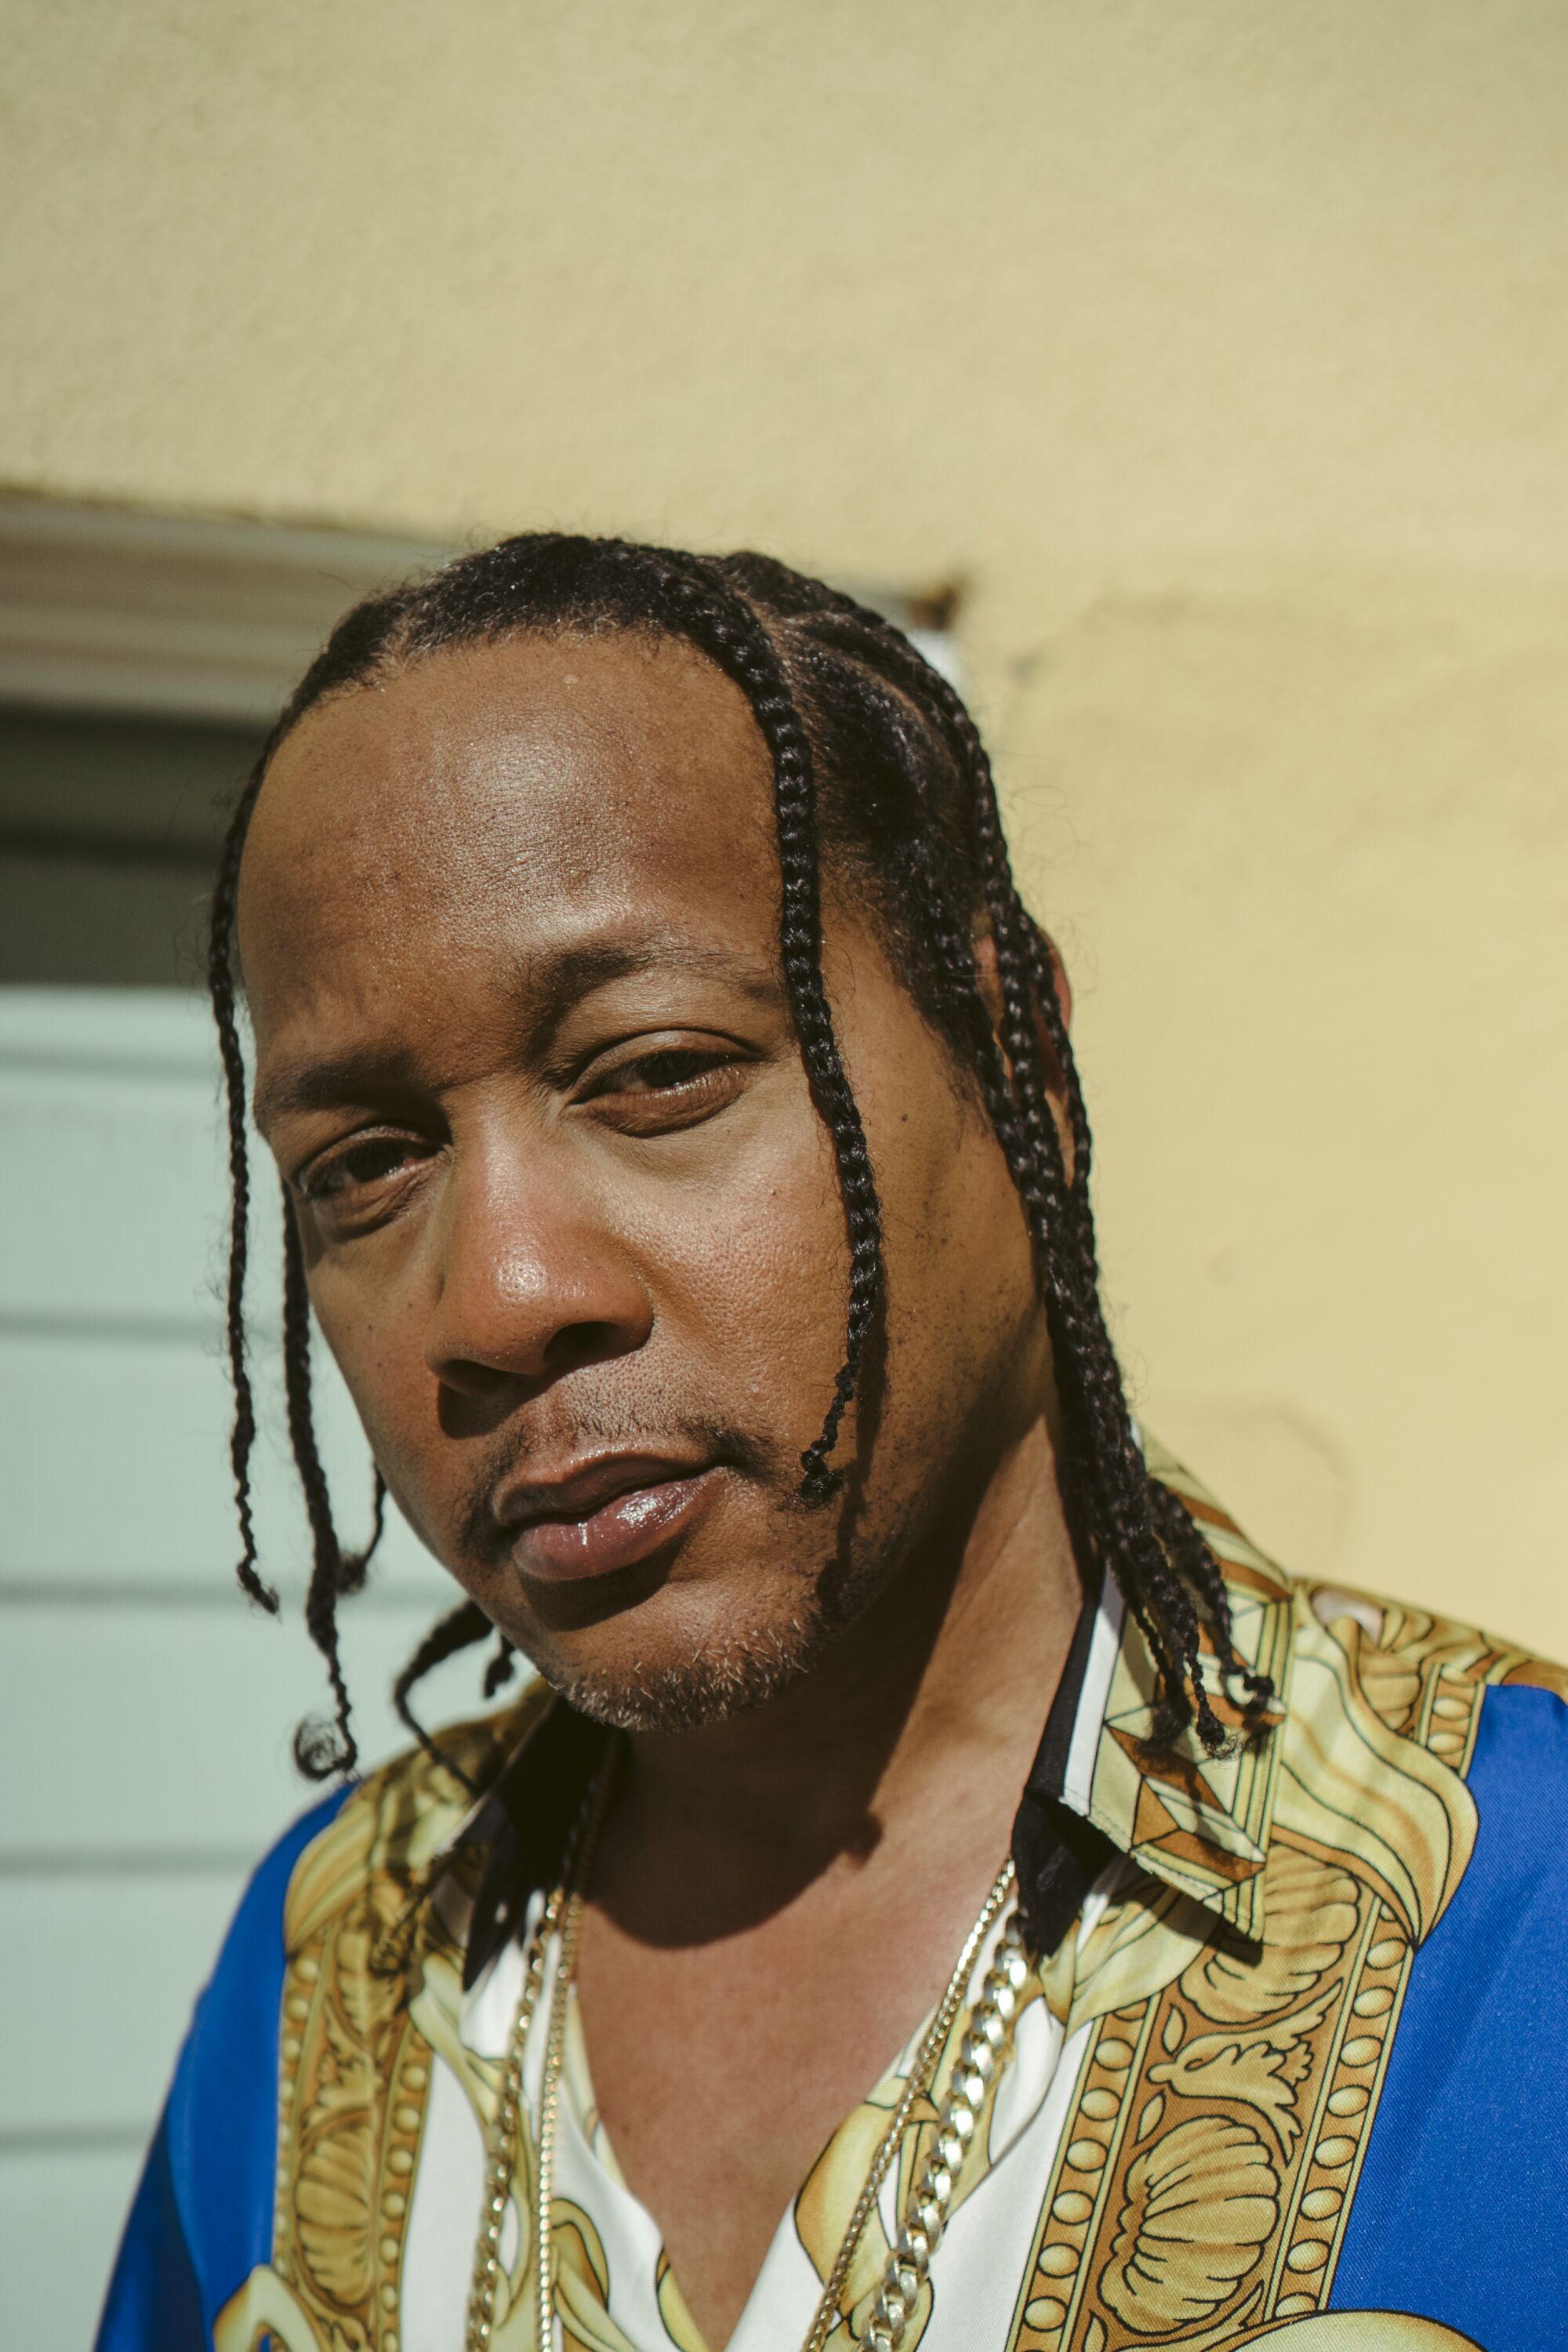 When it comes to L.A. sound, DJ Quik is still the name Los Angeles Times